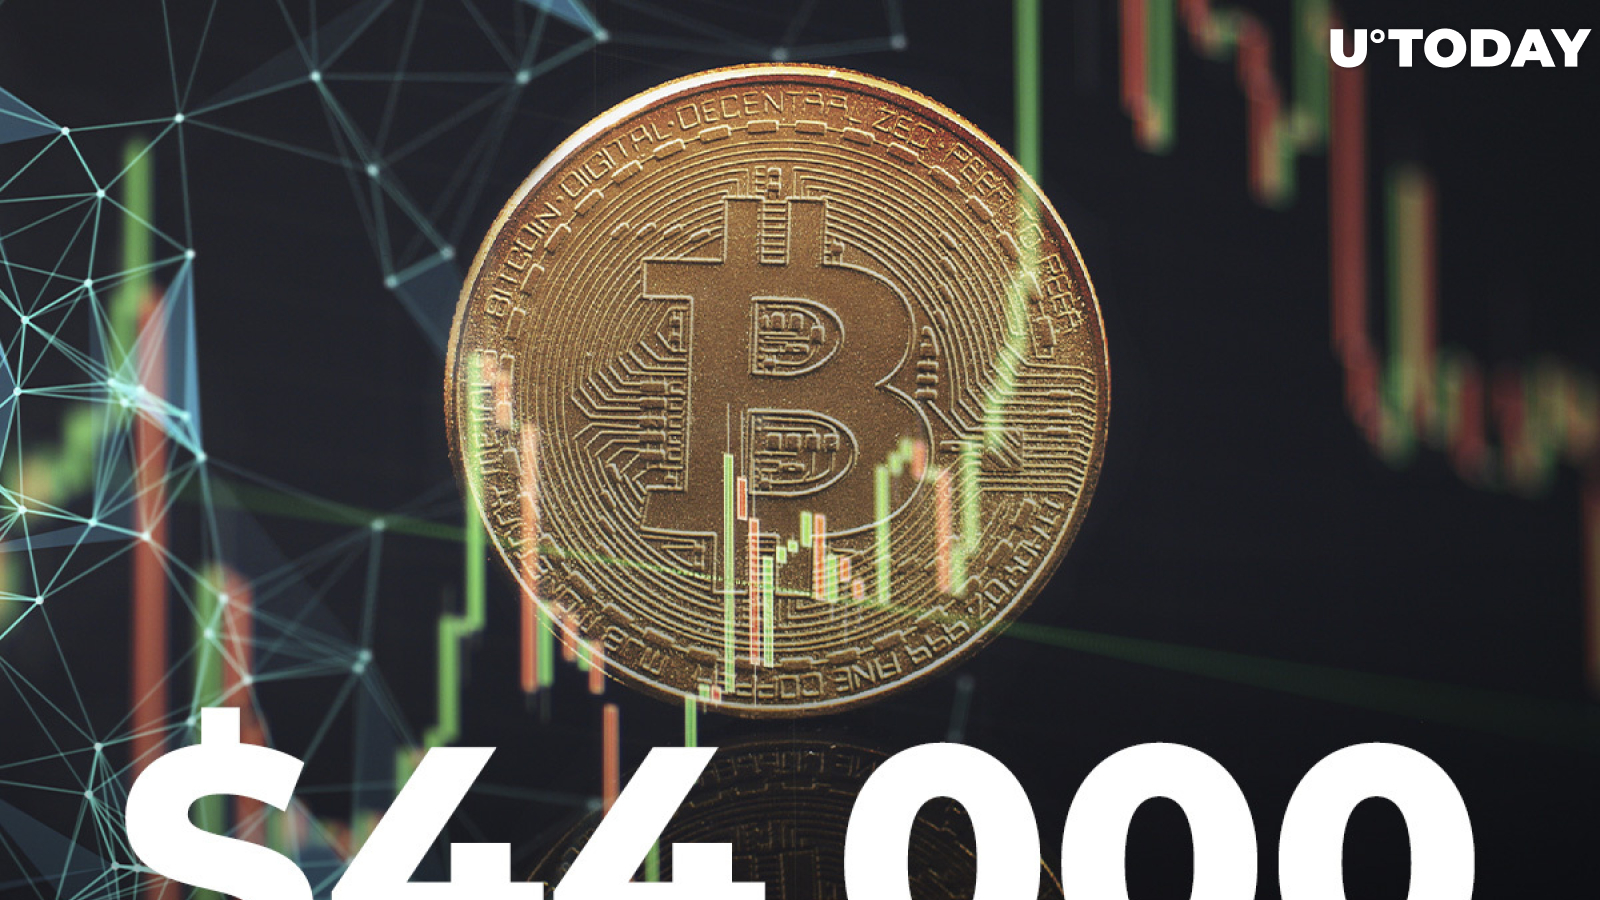 Bitcoin May Rise to $44,000, According to This Pattern: Bloomberg